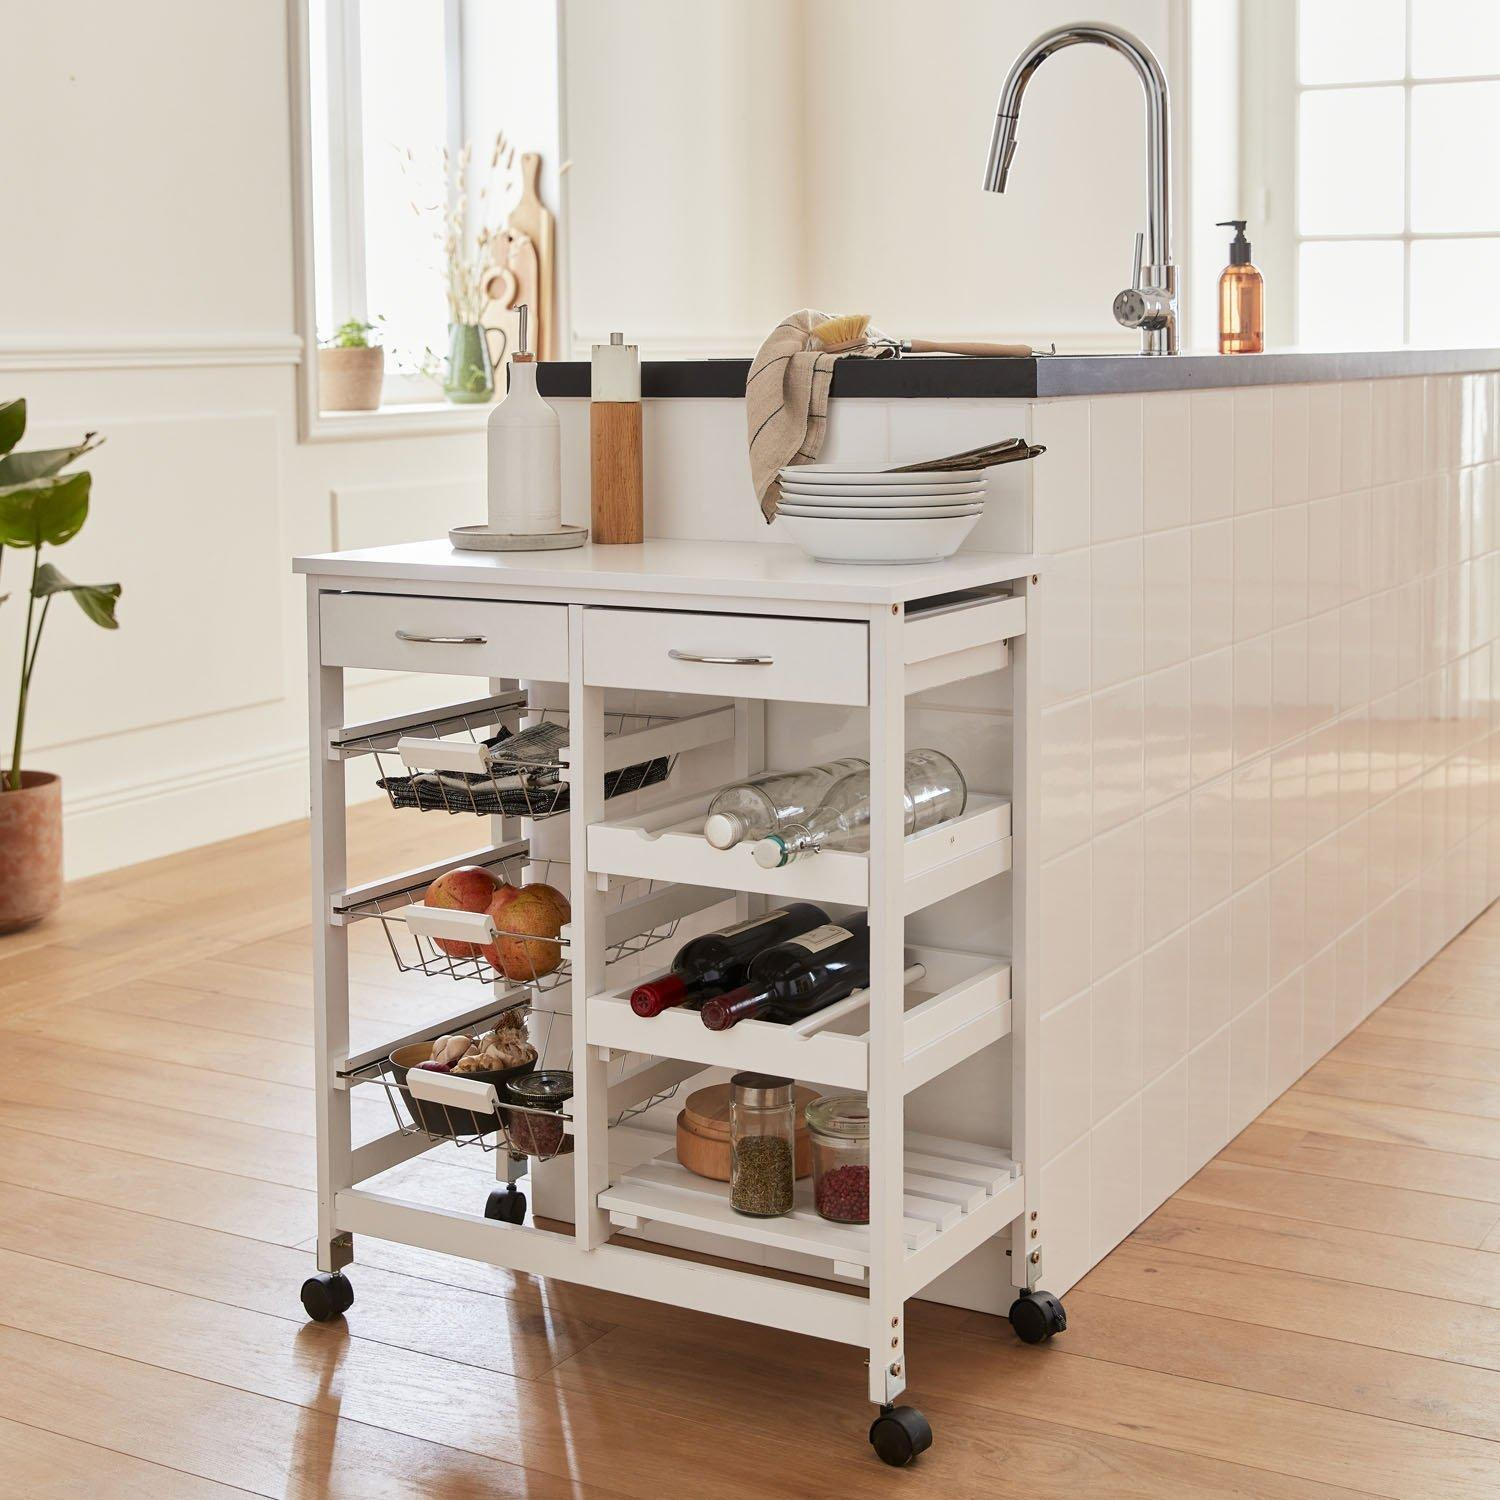 Wood-effect Kitchen Cart With Wheels - image 1